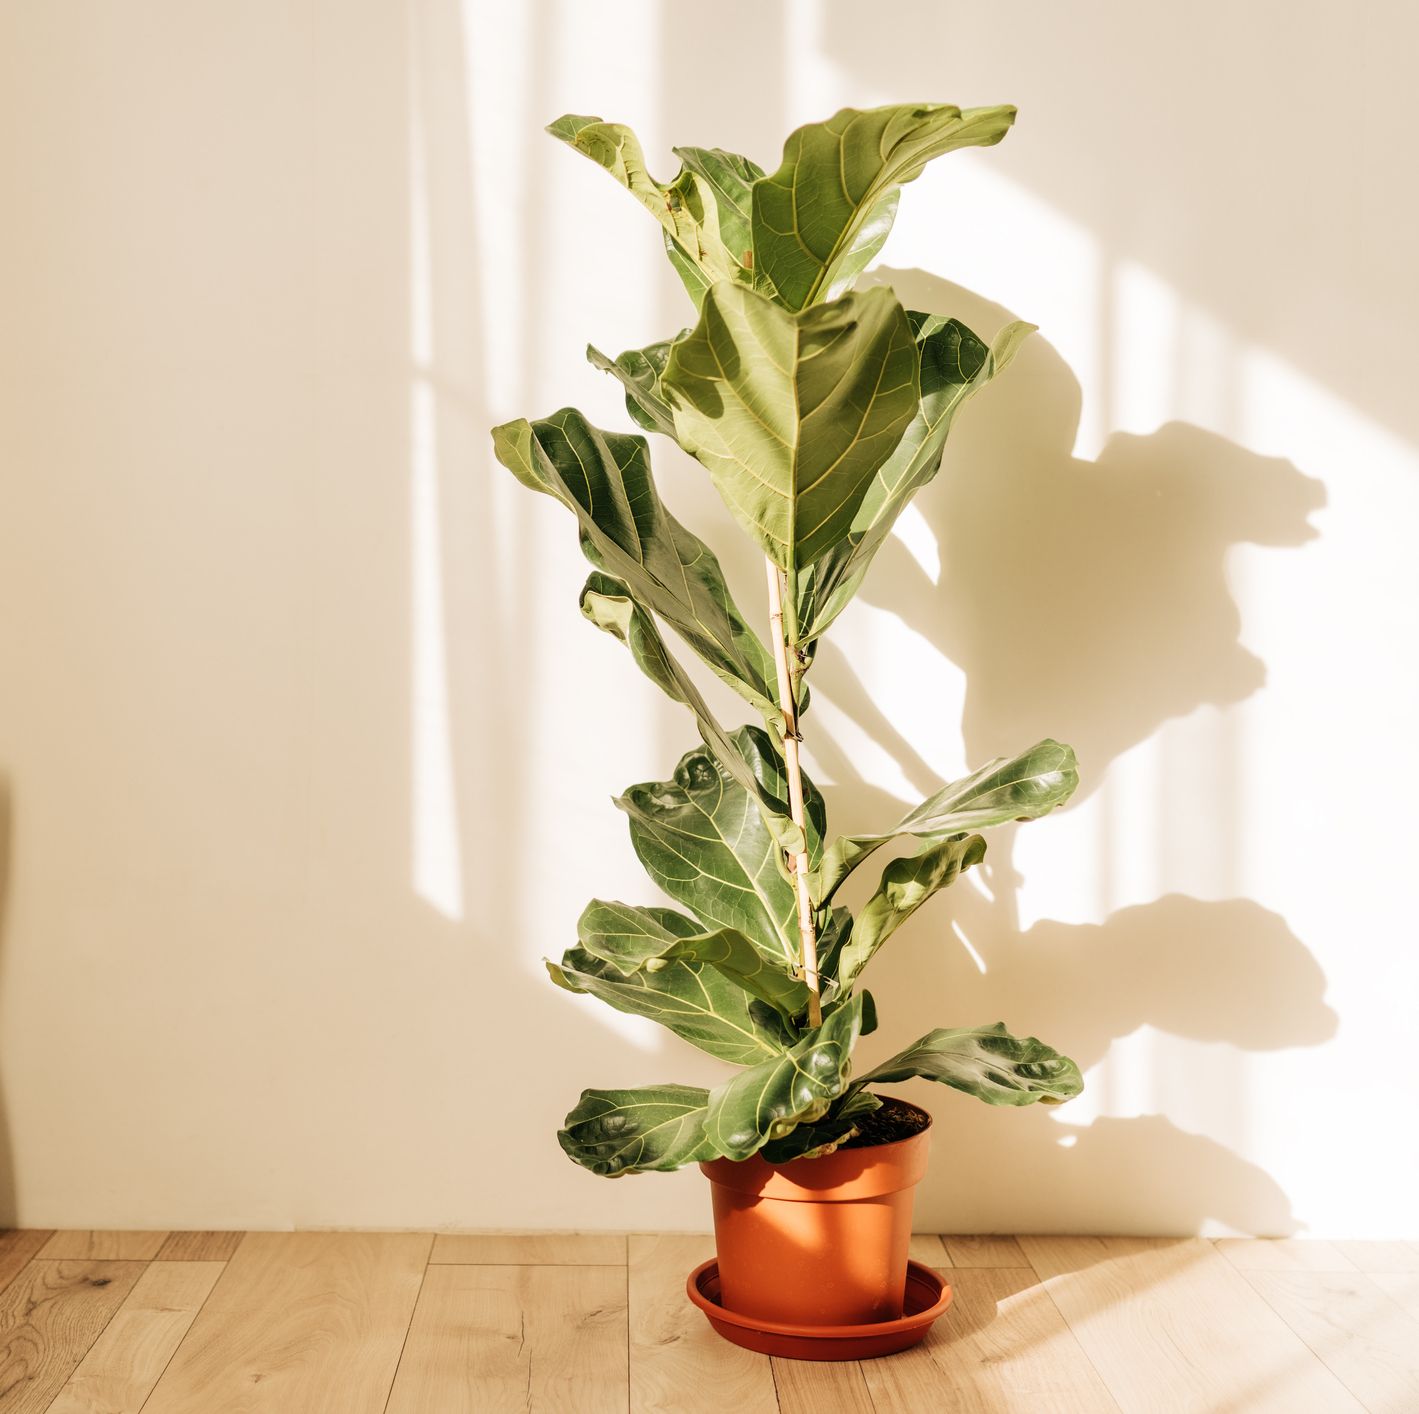 There's an Amazon Plant Sale Right Now With Fiddle Leaf Fig Trees for Only $39